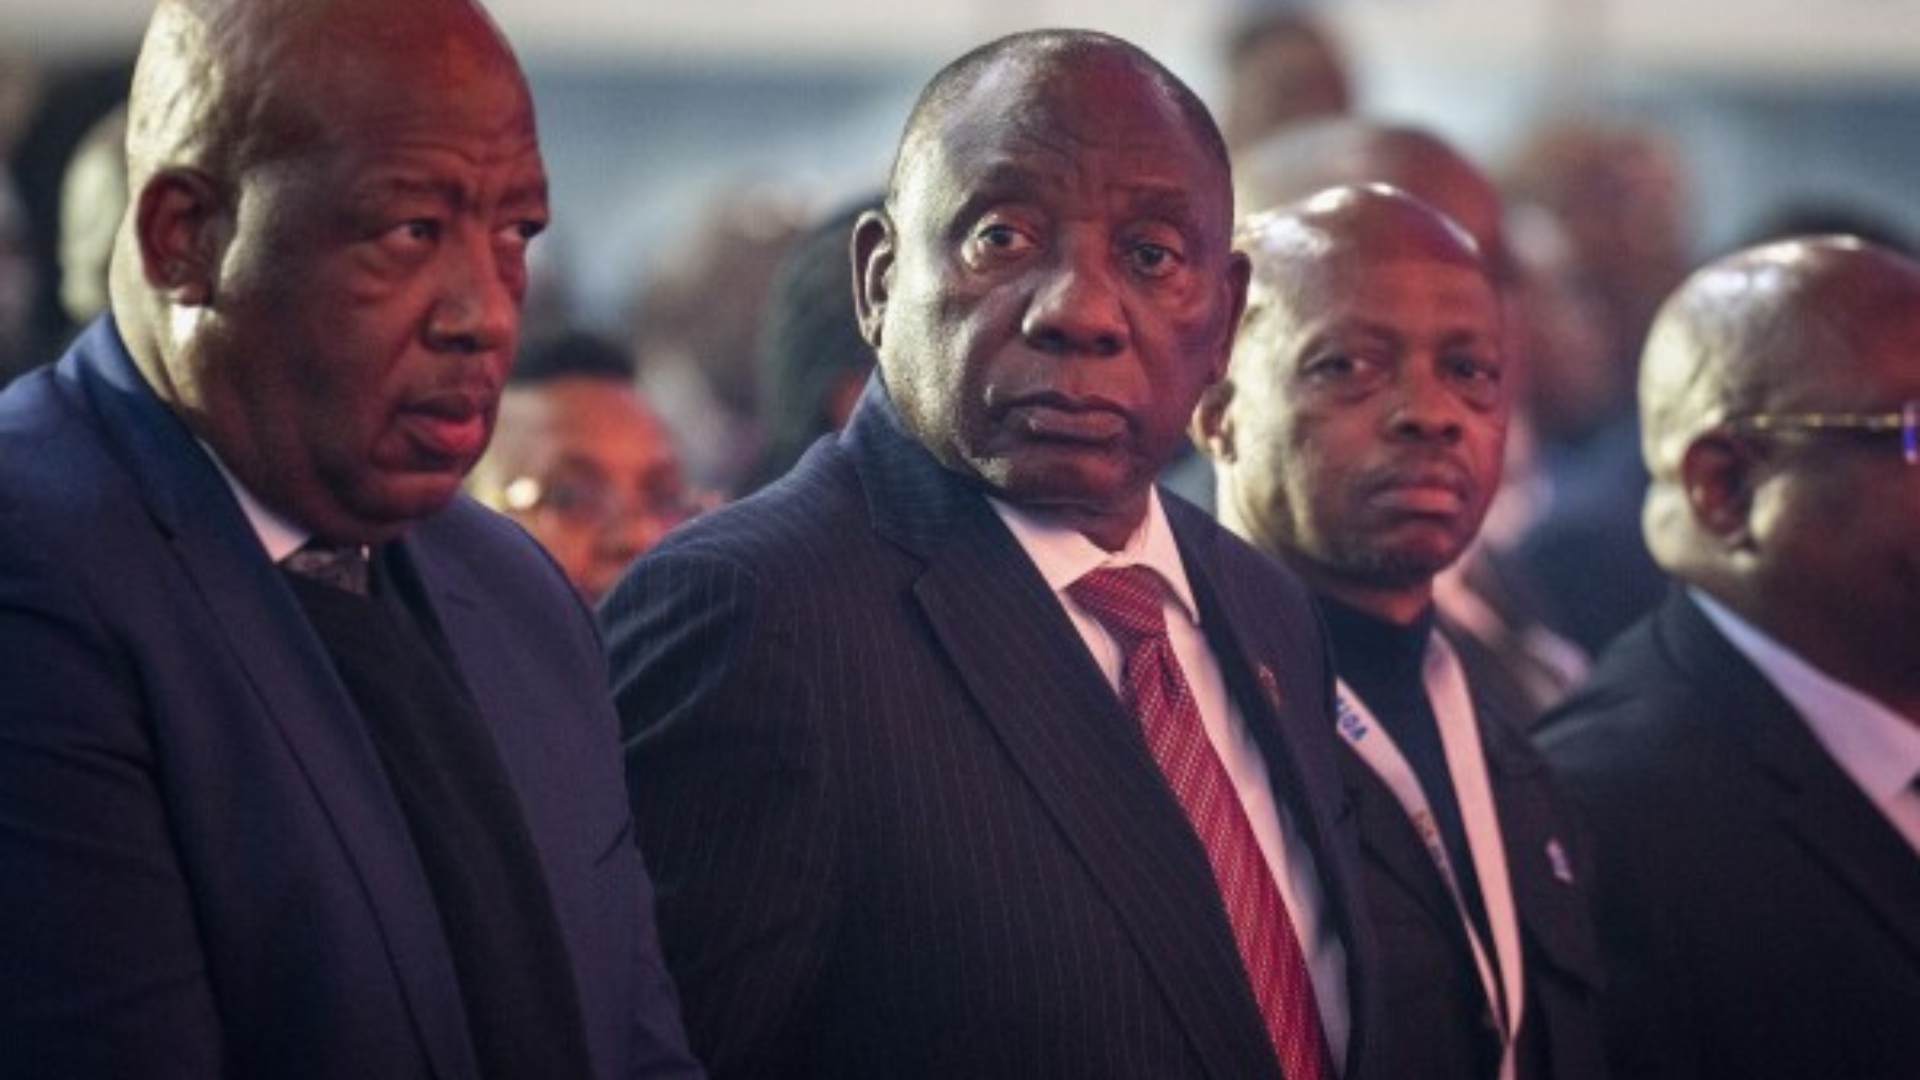 South Africa Election: Ramaphosa’s ANC Loses Majority After 30 Years; Here Are Potential Coalition Partners